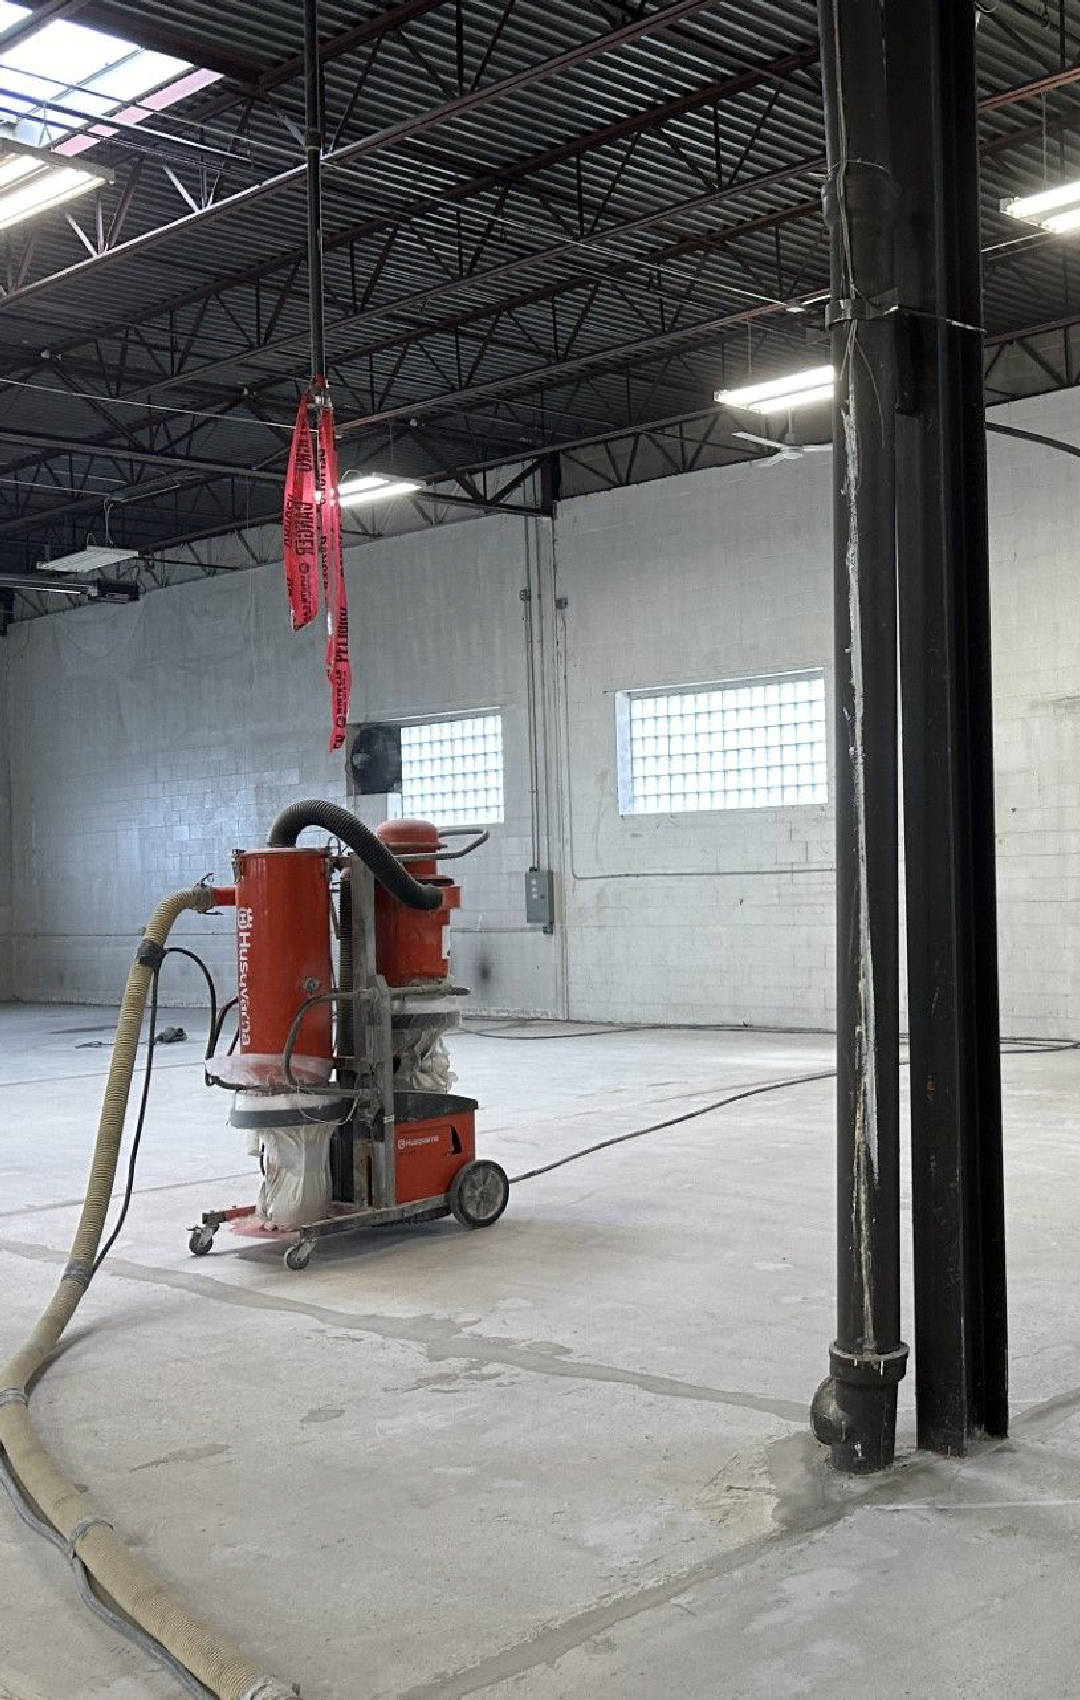 A concrete polishing machine is sitting in the middle of a large warehouse.